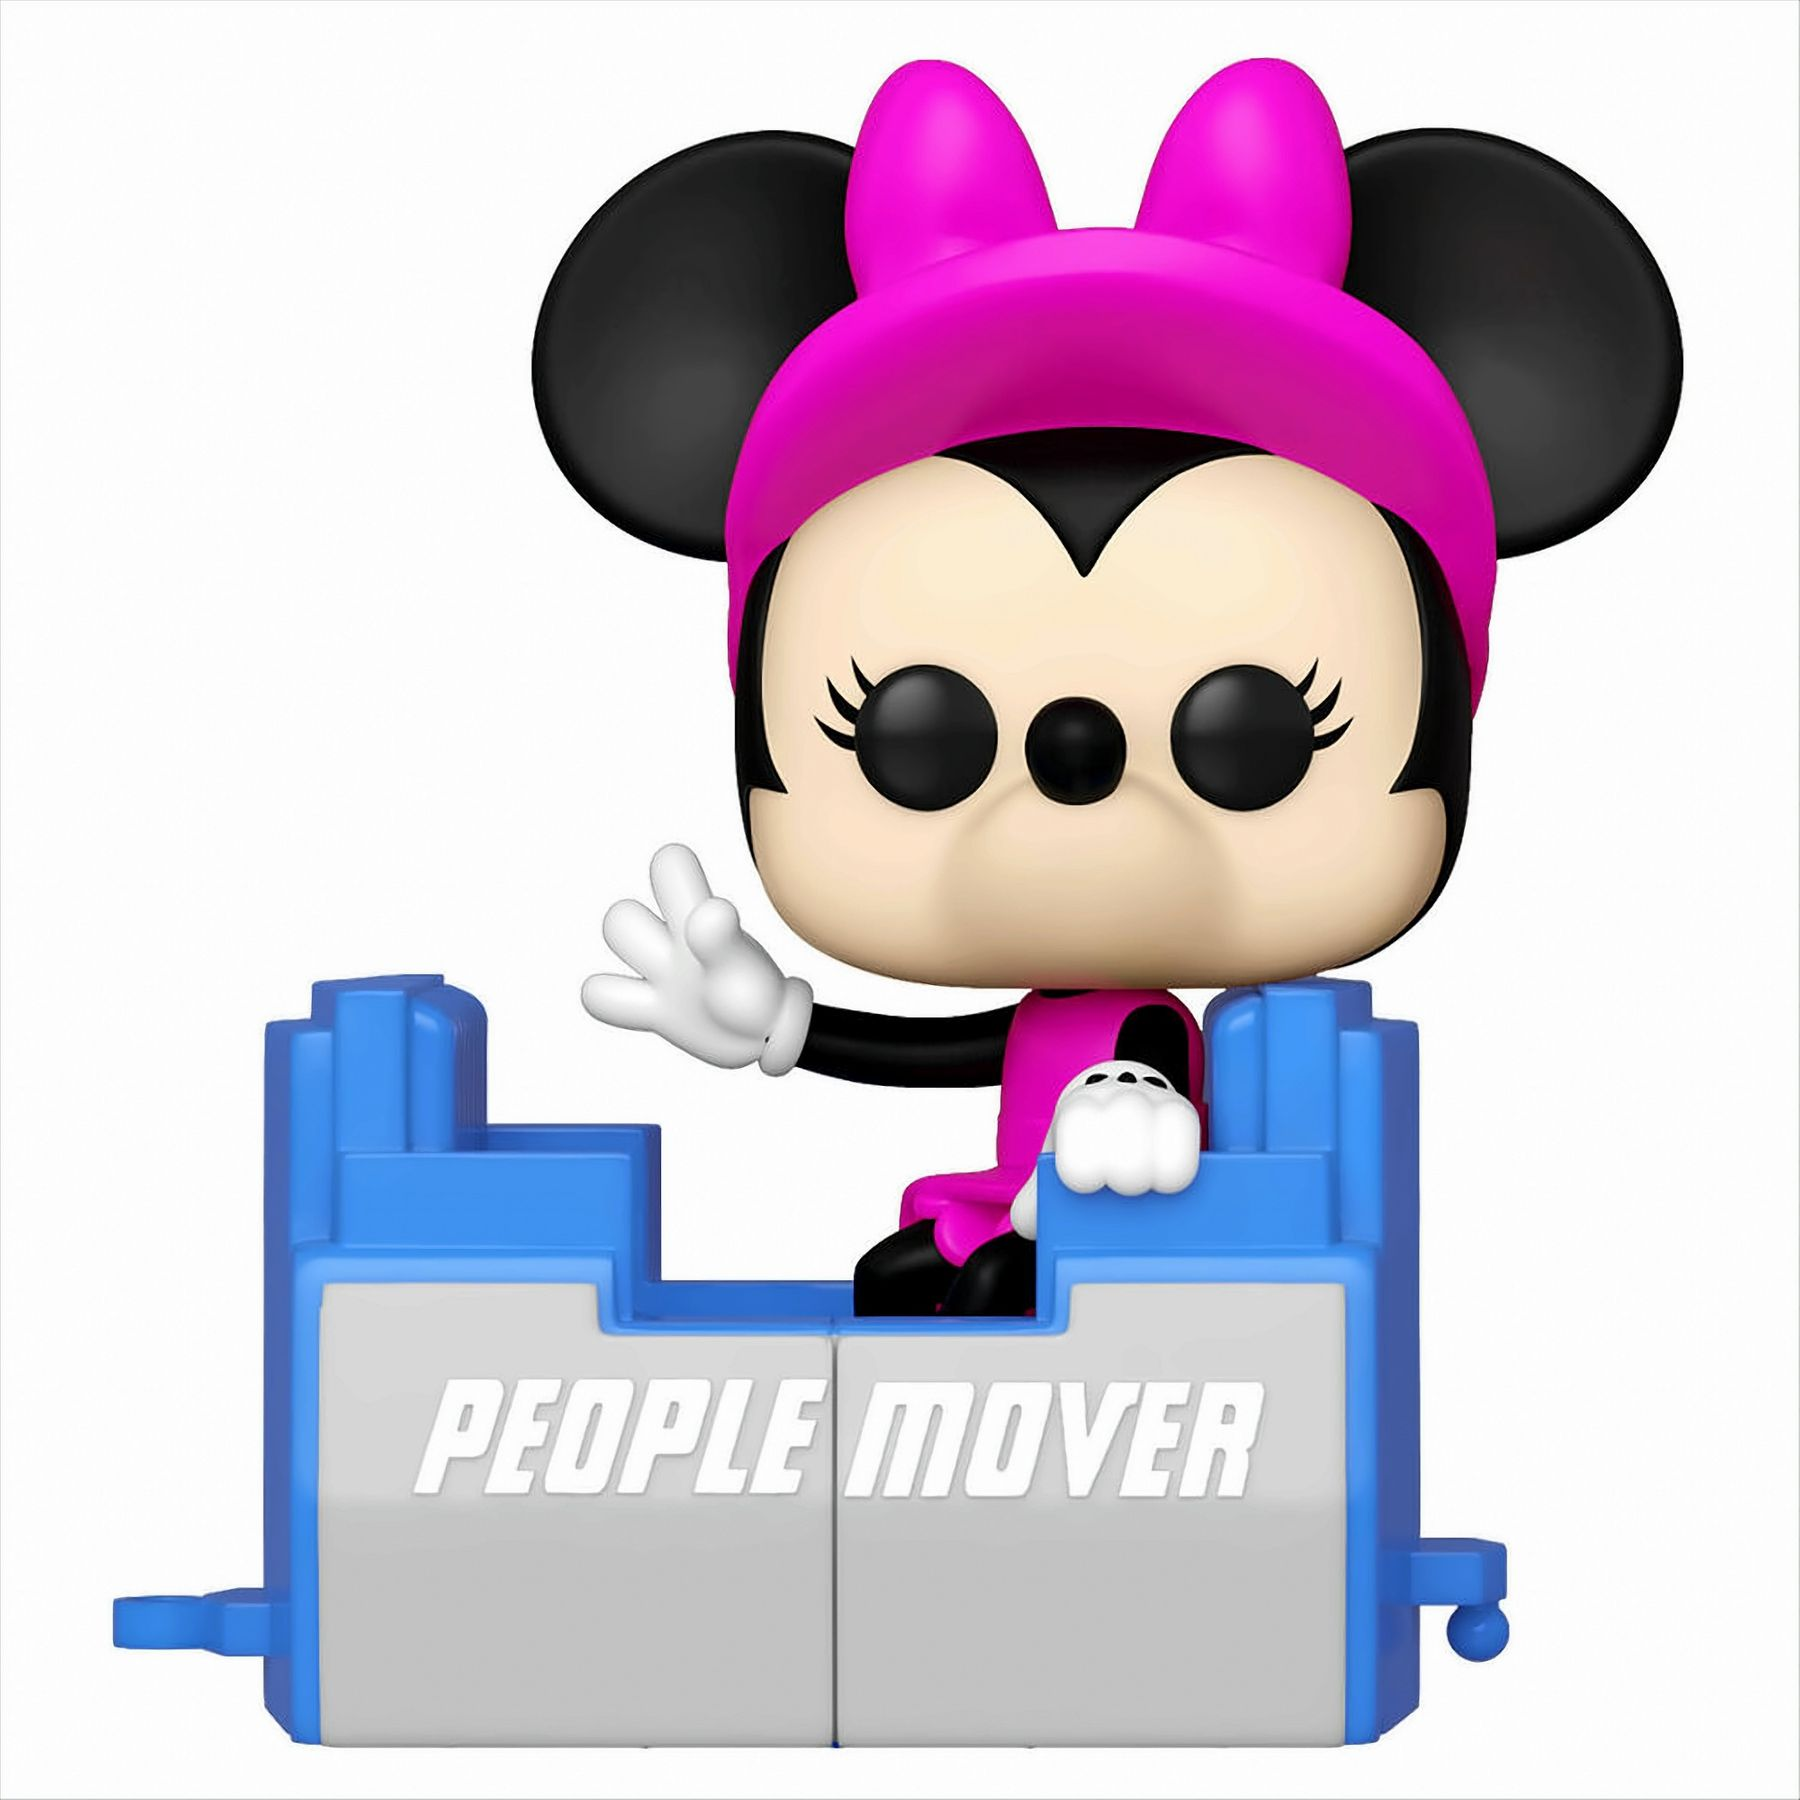 - Peoplemover Mouse -Minnie World on Disney 50 POP